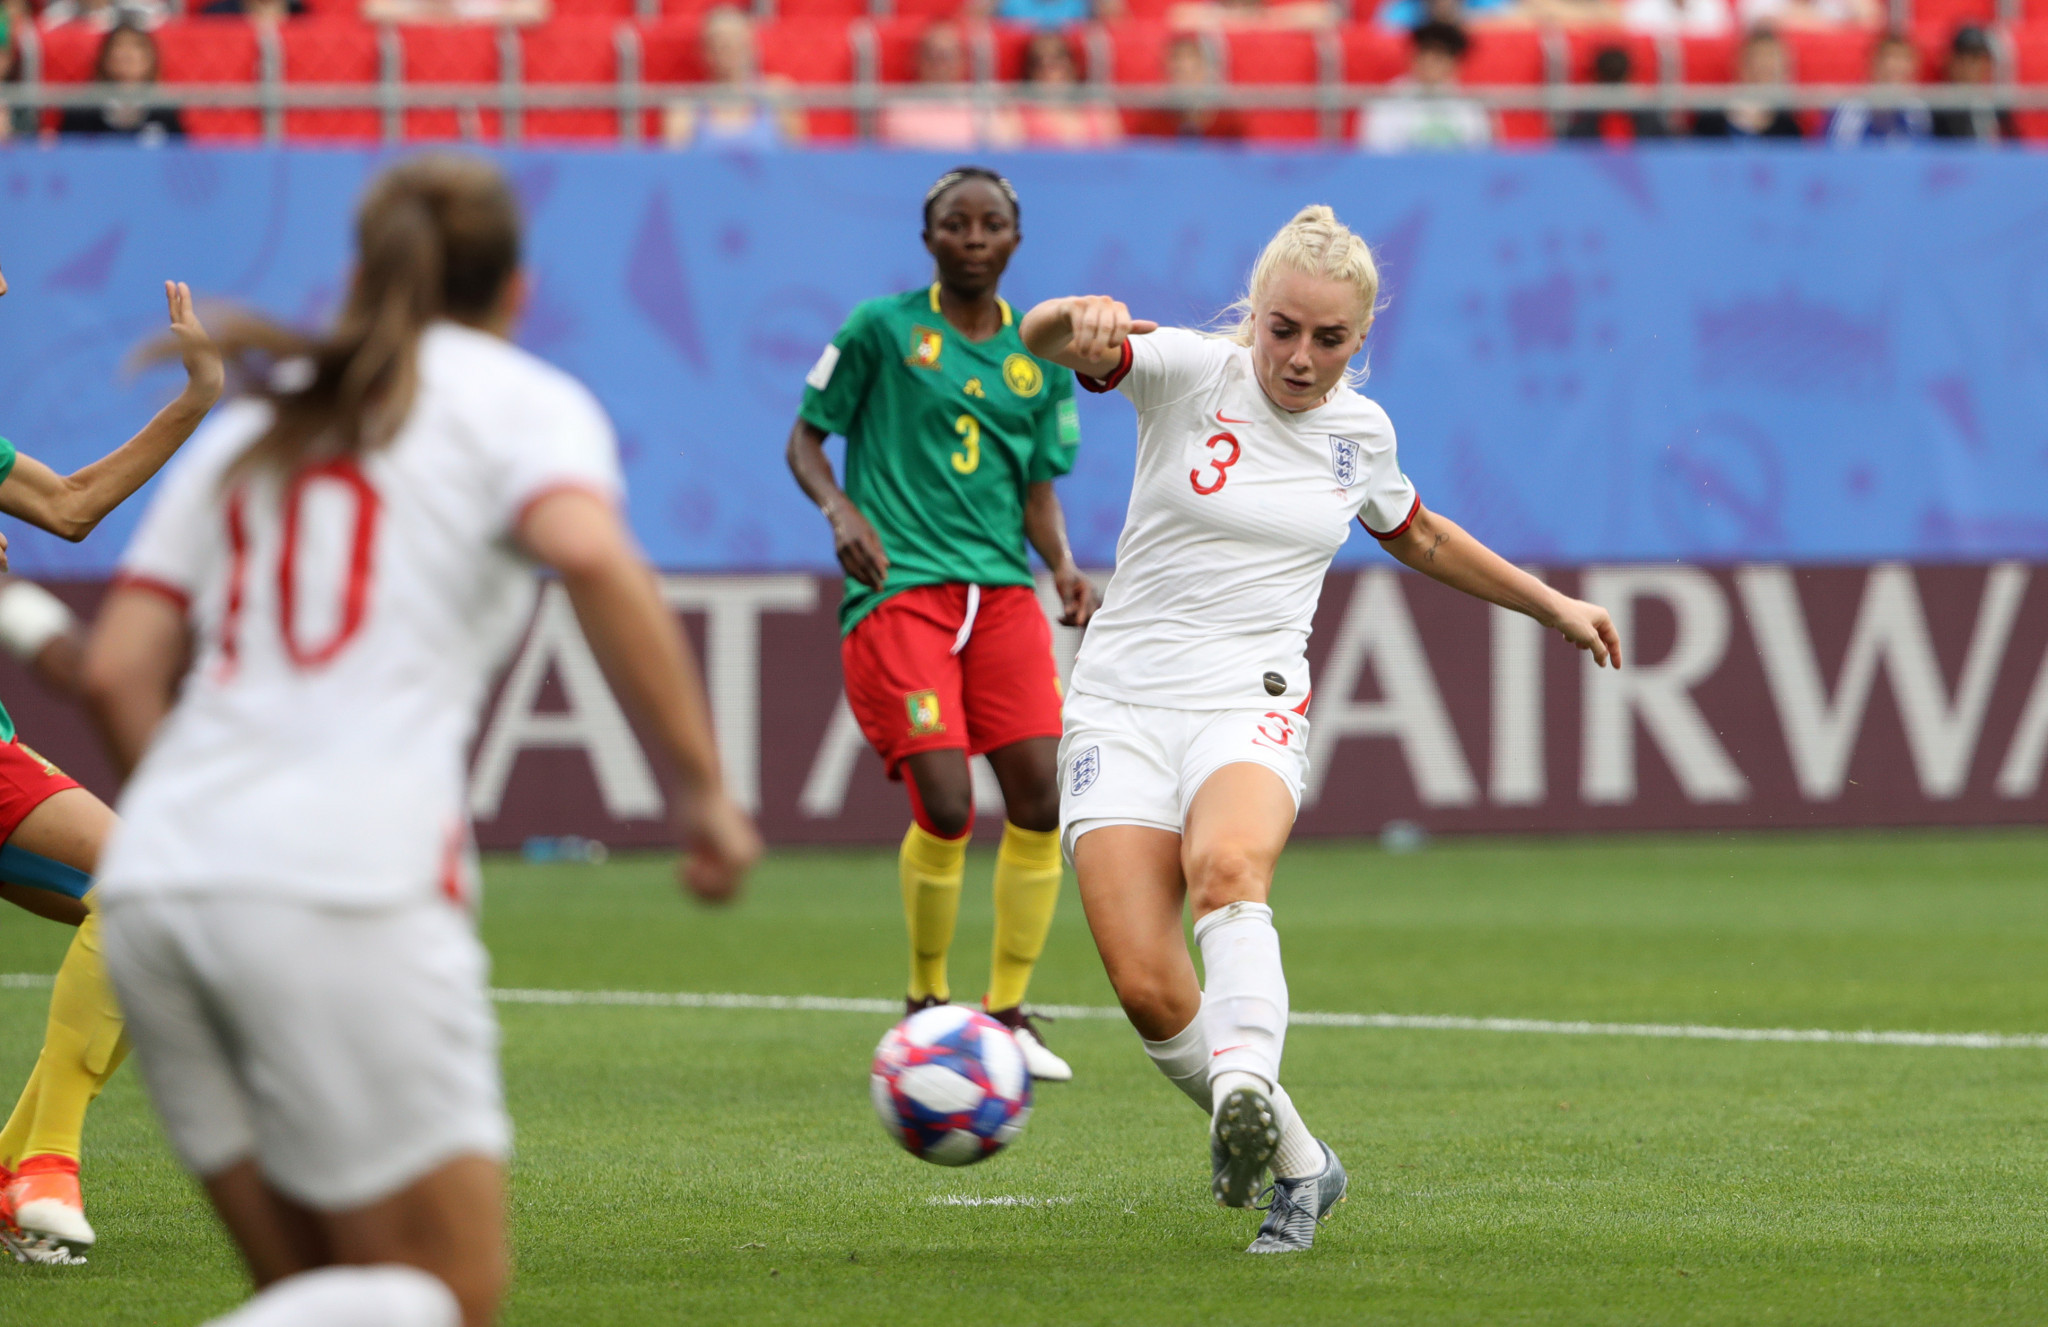 England sealed their quarter final place when Alex Greenwood swept home a corner for 3-0 ©Getty Images